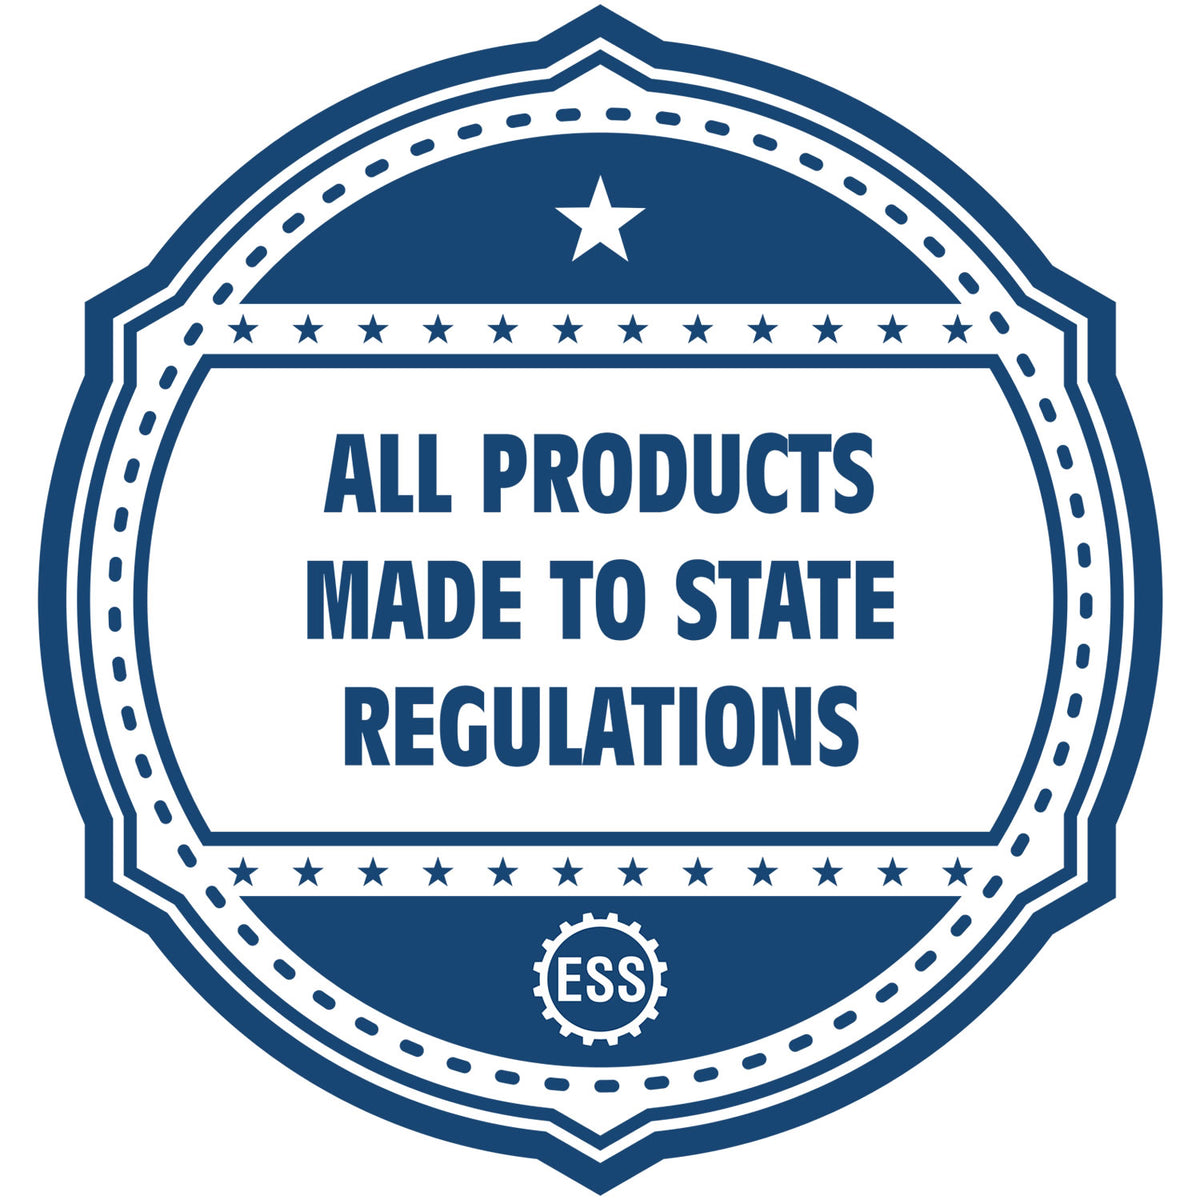 An icon or badge element for the Wooden Handle Arizona State Seal Notary Public Stamp showing that this product is made in compliance with state regulations.